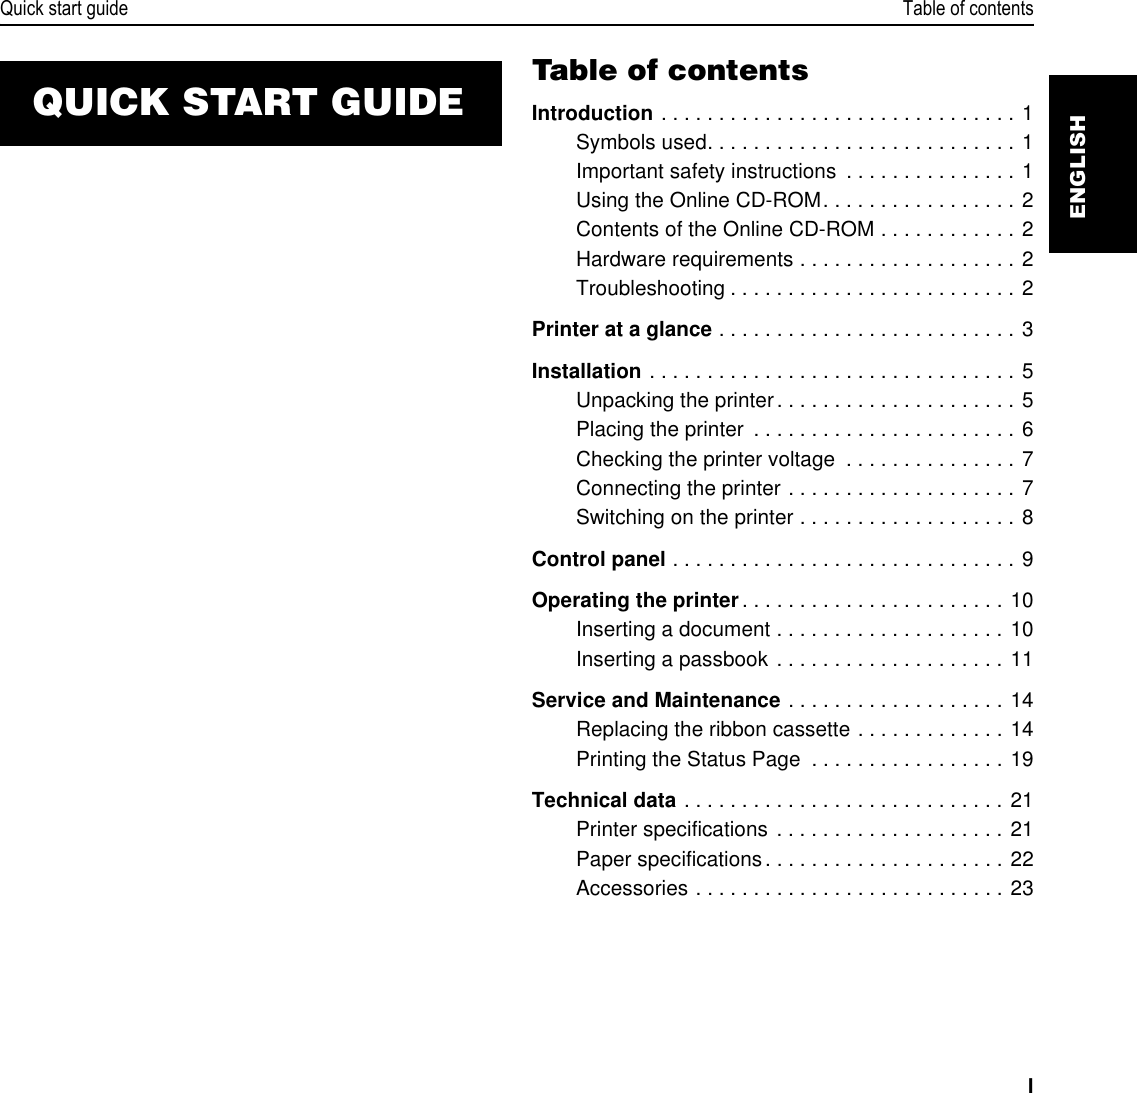 Quick start guide Table of contentsIENGLISHTable of contentsIntroduction . . . . . . . . . . . . . . . . . . . . . . . . . . . . . . . 1Symbols used. . . . . . . . . . . . . . . . . . . . . . . . . . . 1Important safety instructions  . . . . . . . . . . . . . . . 1Using the Online CD-ROM. . . . . . . . . . . . . . . . . 2Contents of the Online CD-ROM . . . . . . . . . . . . 2Hardware requirements . . . . . . . . . . . . . . . . . . . 2Troubleshooting . . . . . . . . . . . . . . . . . . . . . . . . . 2Printer at a glance . . . . . . . . . . . . . . . . . . . . . . . . . . 3Installation . . . . . . . . . . . . . . . . . . . . . . . . . . . . . . . . 5Unpacking the printer. . . . . . . . . . . . . . . . . . . . . 5Placing the printer  . . . . . . . . . . . . . . . . . . . . . . . 6Checking the printer voltage  . . . . . . . . . . . . . . . 7Connecting the printer . . . . . . . . . . . . . . . . . . . . 7Switching on the printer . . . . . . . . . . . . . . . . . . . 8Control panel . . . . . . . . . . . . . . . . . . . . . . . . . . . . . . 9Operating the printer. . . . . . . . . . . . . . . . . . . . . . . 10Inserting a document . . . . . . . . . . . . . . . . . . . . 10Inserting a passbook . . . . . . . . . . . . . . . . . . . . 11Service and Maintenance . . . . . . . . . . . . . . . . . . . 14Replacing the ribbon cassette . . . . . . . . . . . . . 14Printing the Status Page  . . . . . . . . . . . . . . . . . 19Technical data . . . . . . . . . . . . . . . . . . . . . . . . . . . . 21Printer specifications . . . . . . . . . . . . . . . . . . . . 21Paper specifications. . . . . . . . . . . . . . . . . . . . . 22Accessories . . . . . . . . . . . . . . . . . . . . . . . . . . . 23QUICK START GUIDE